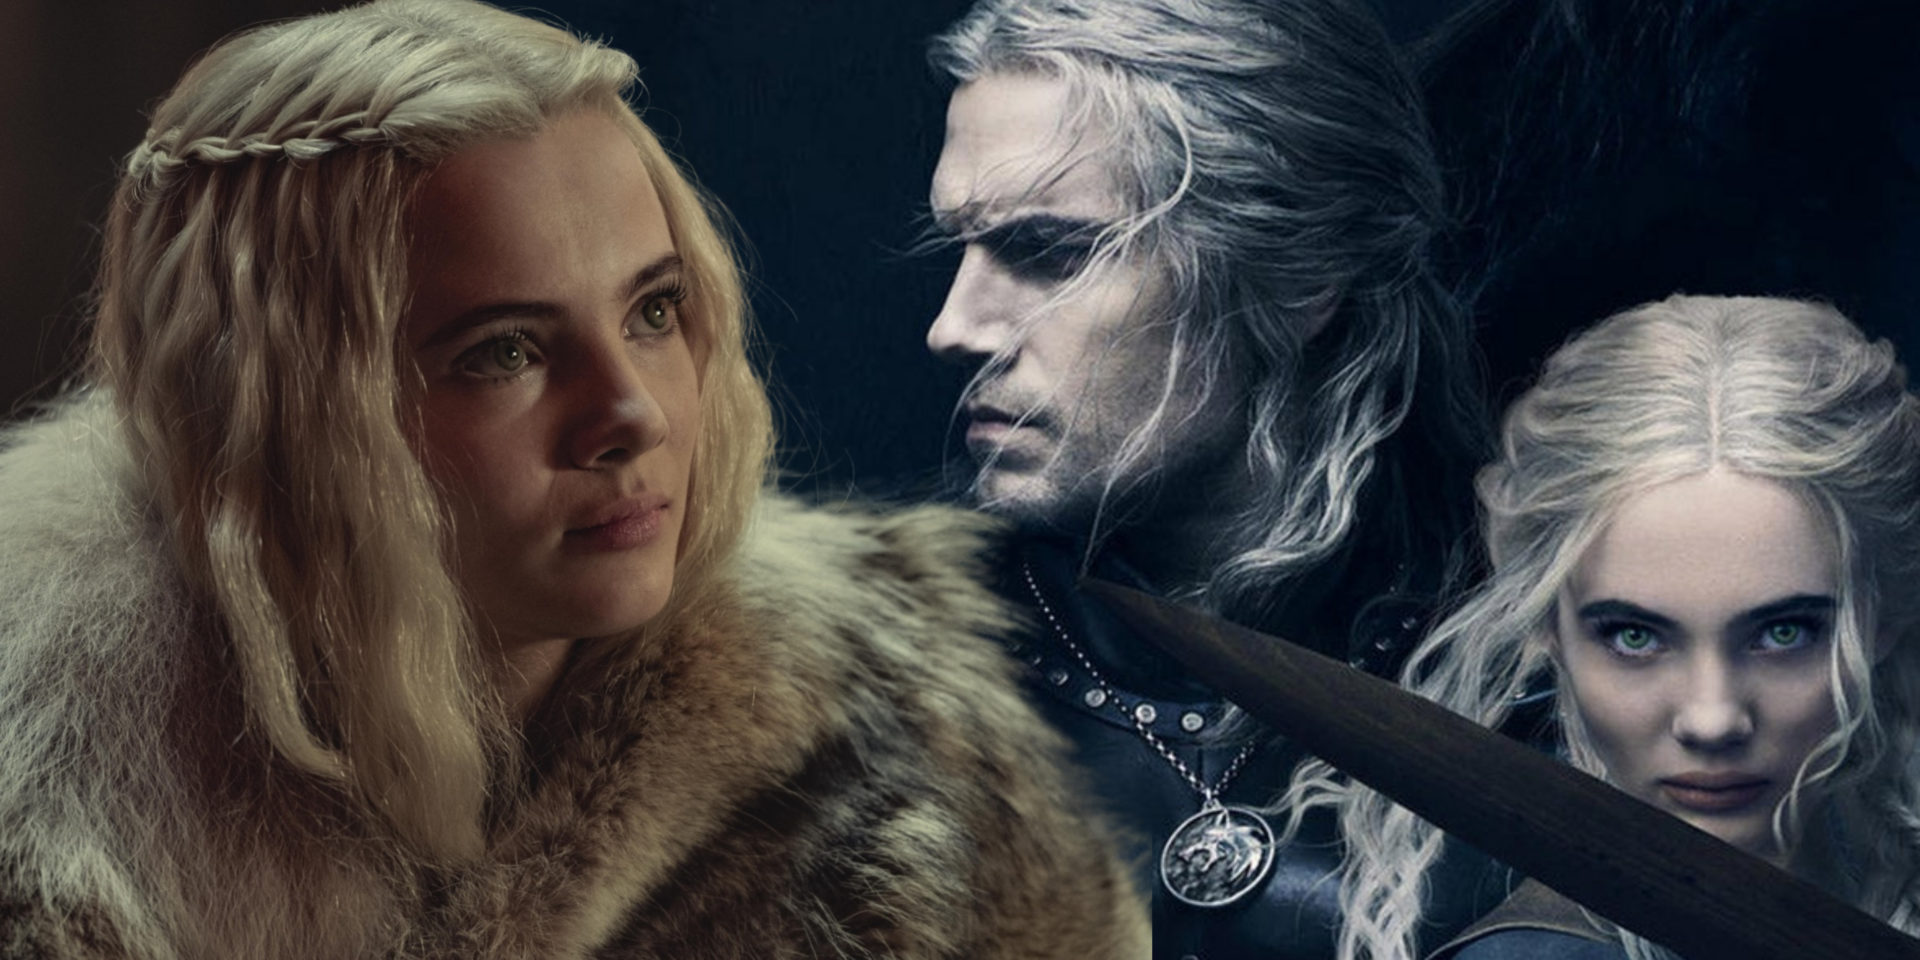 The Witcher showrunner says the series won’t go past the books